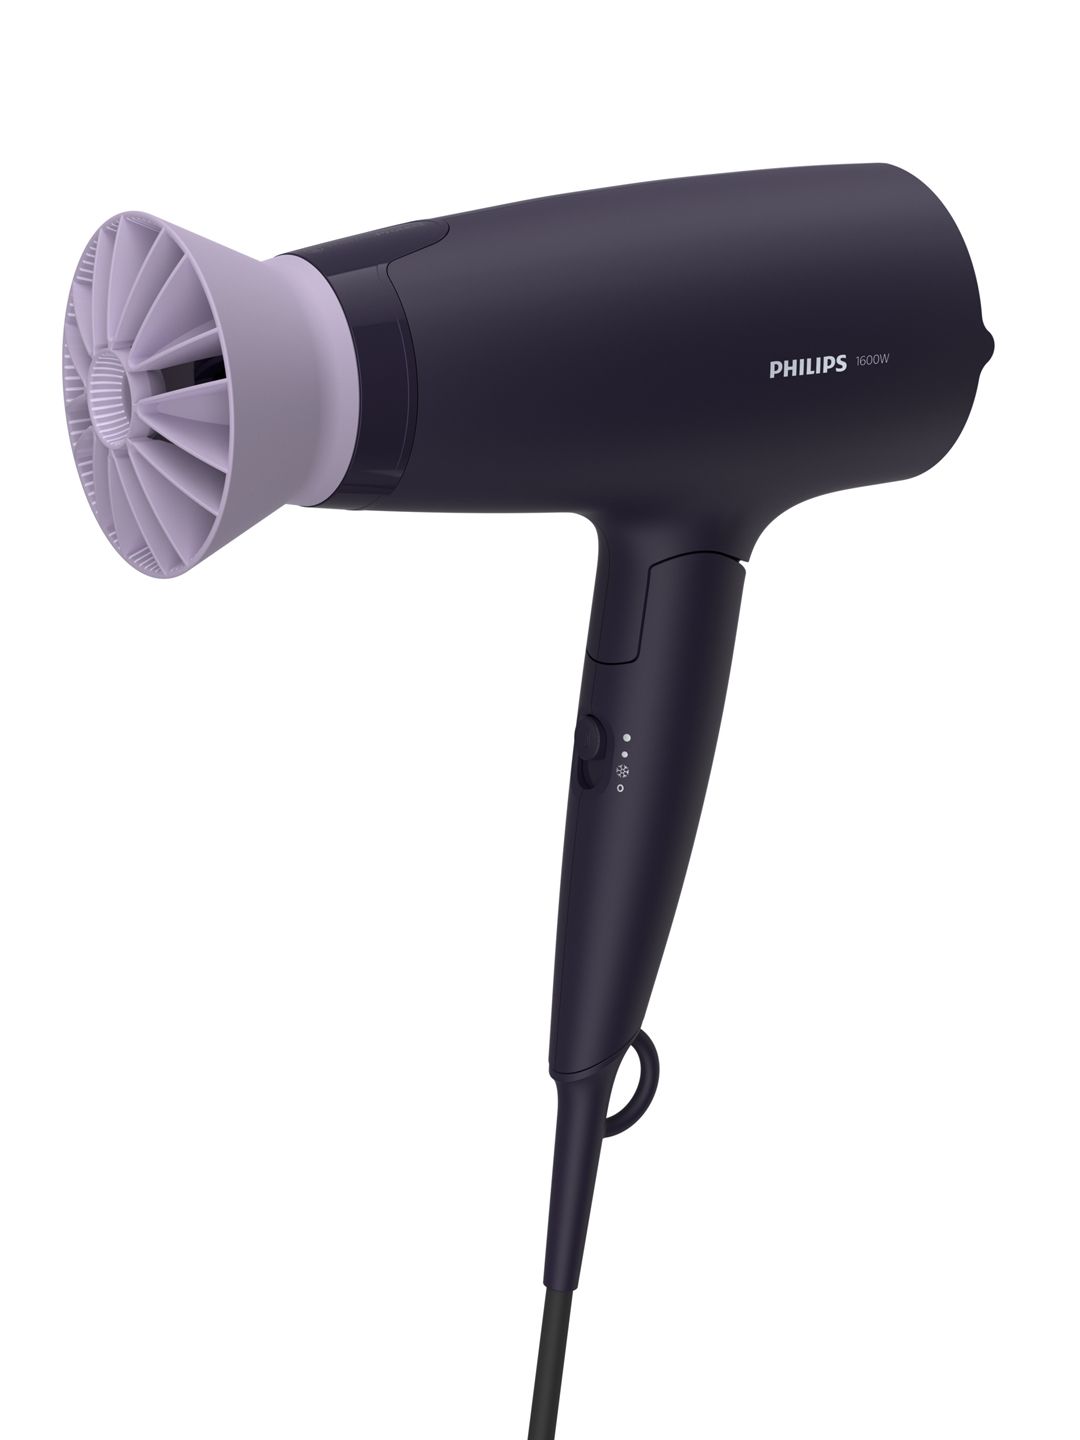 Philips Thermo Protect Air Flower Hair Dryer BHD318/00 Price in India